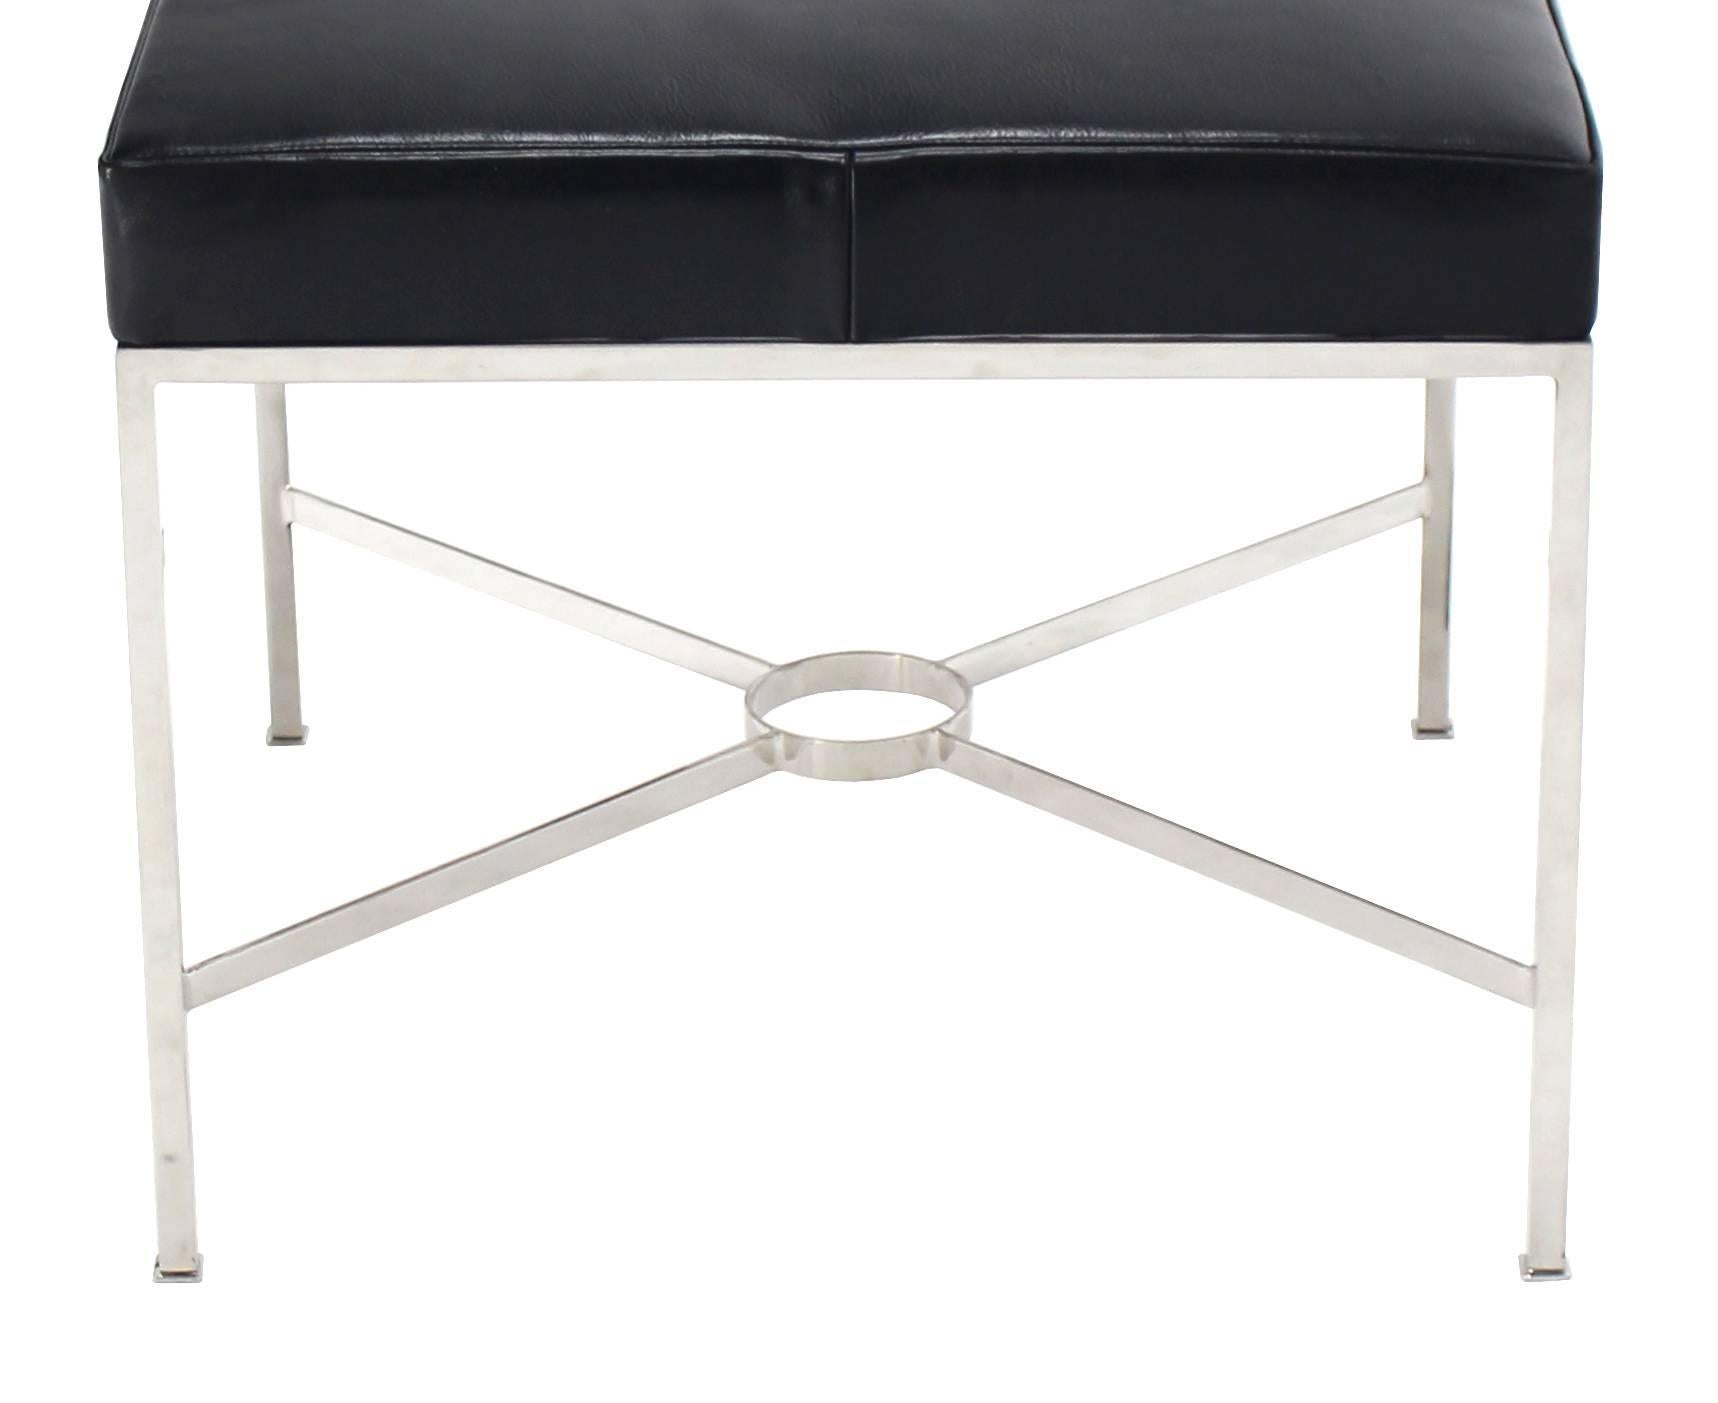 X-Base Chrome and Leather Upholstery Square Bench For Sale 1